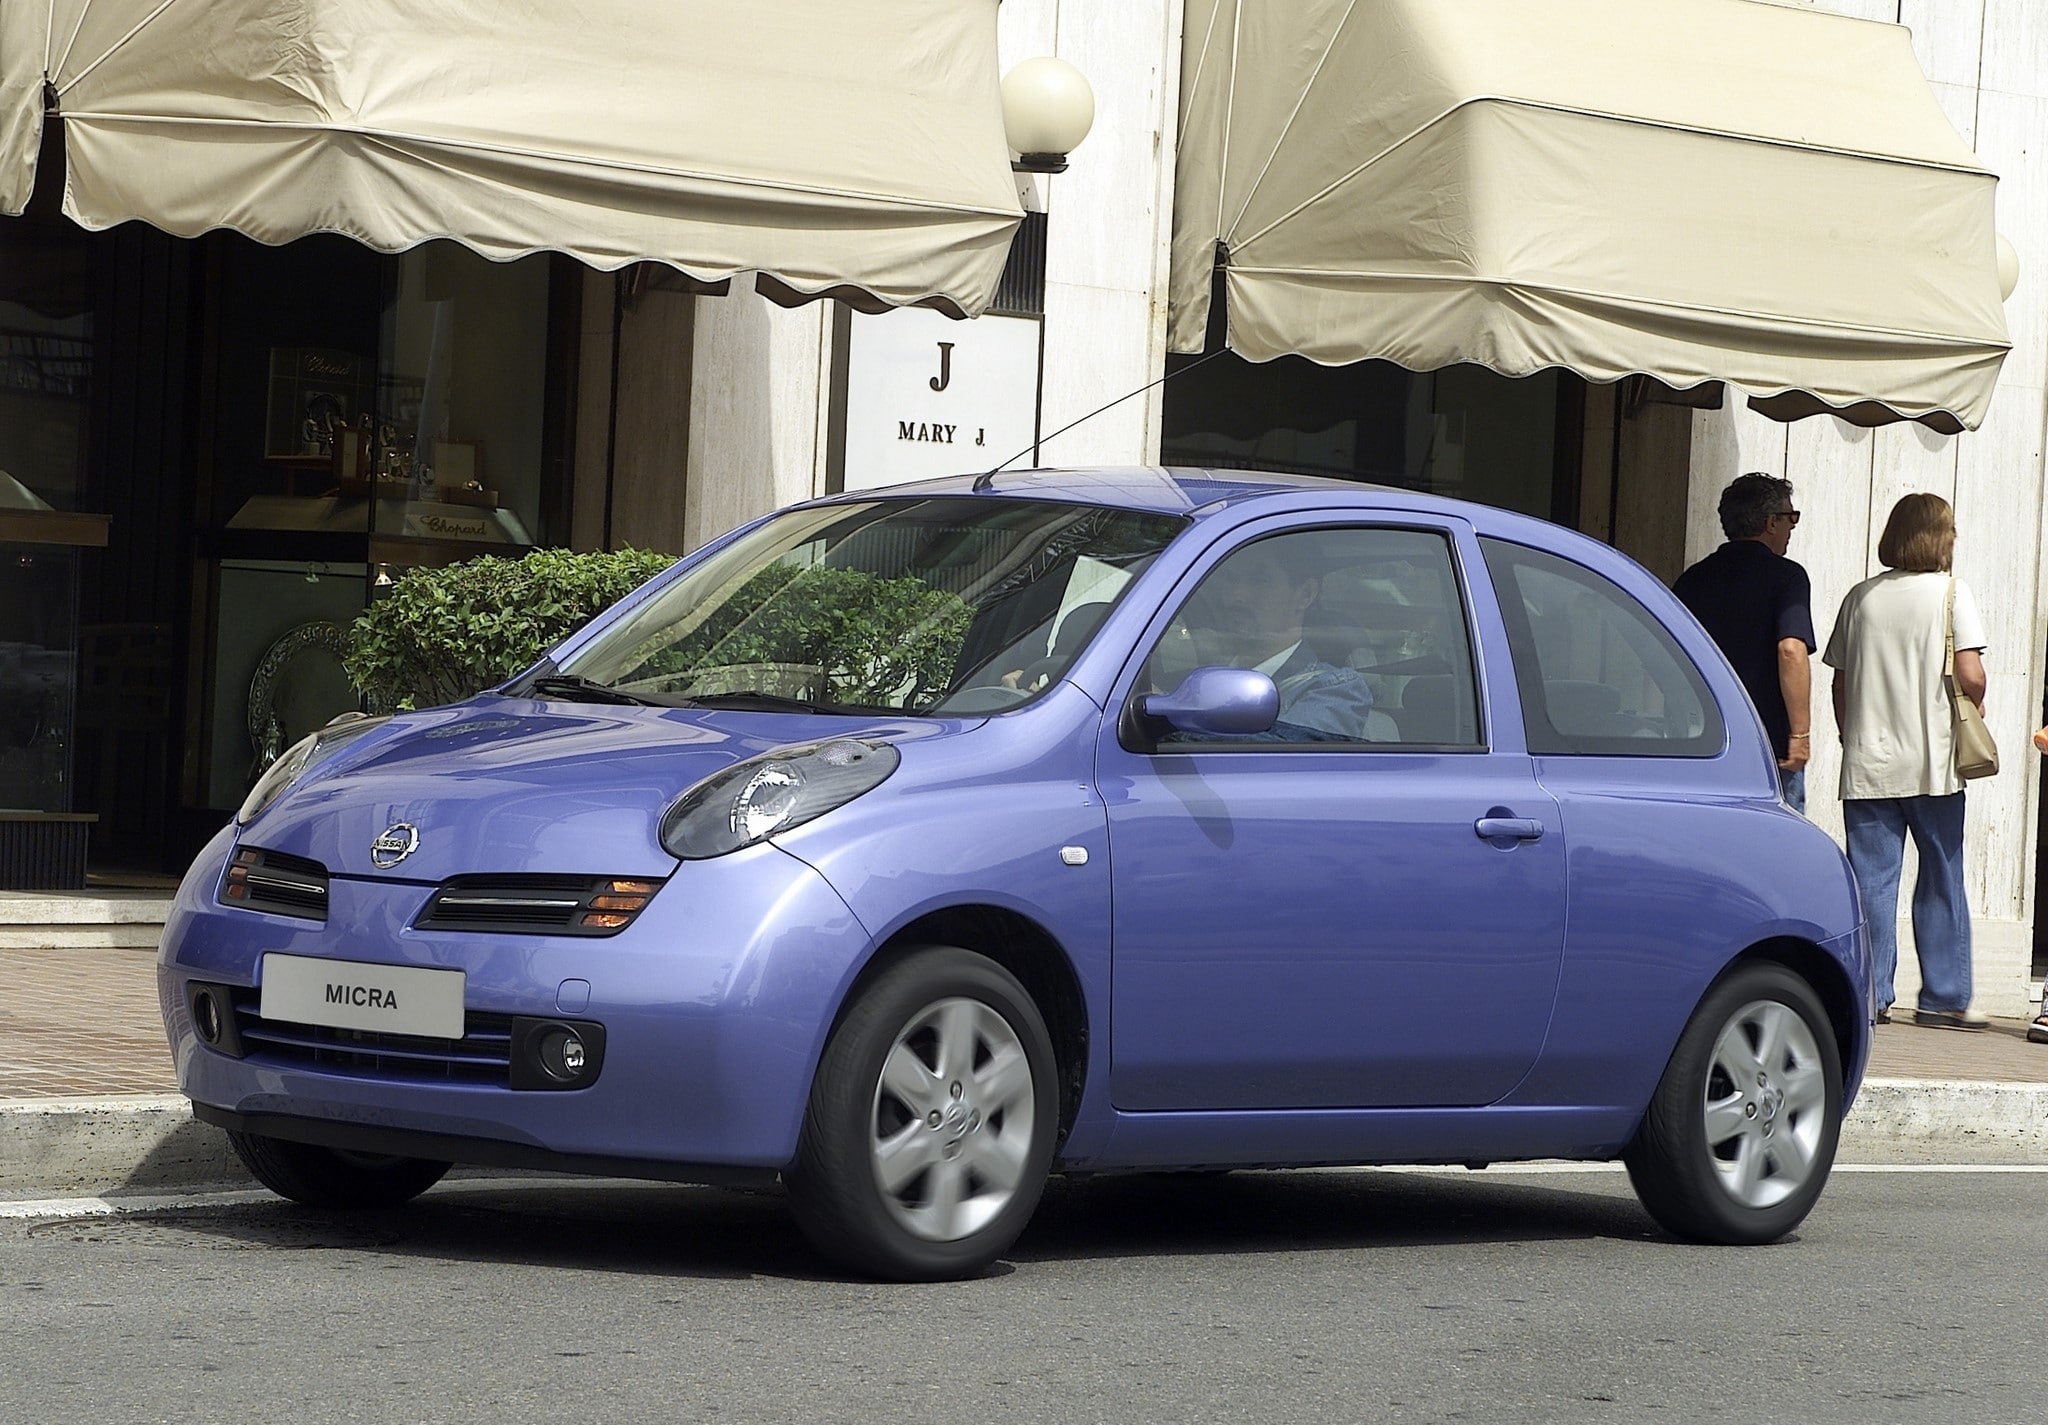 images_nissan_micra_2003_1